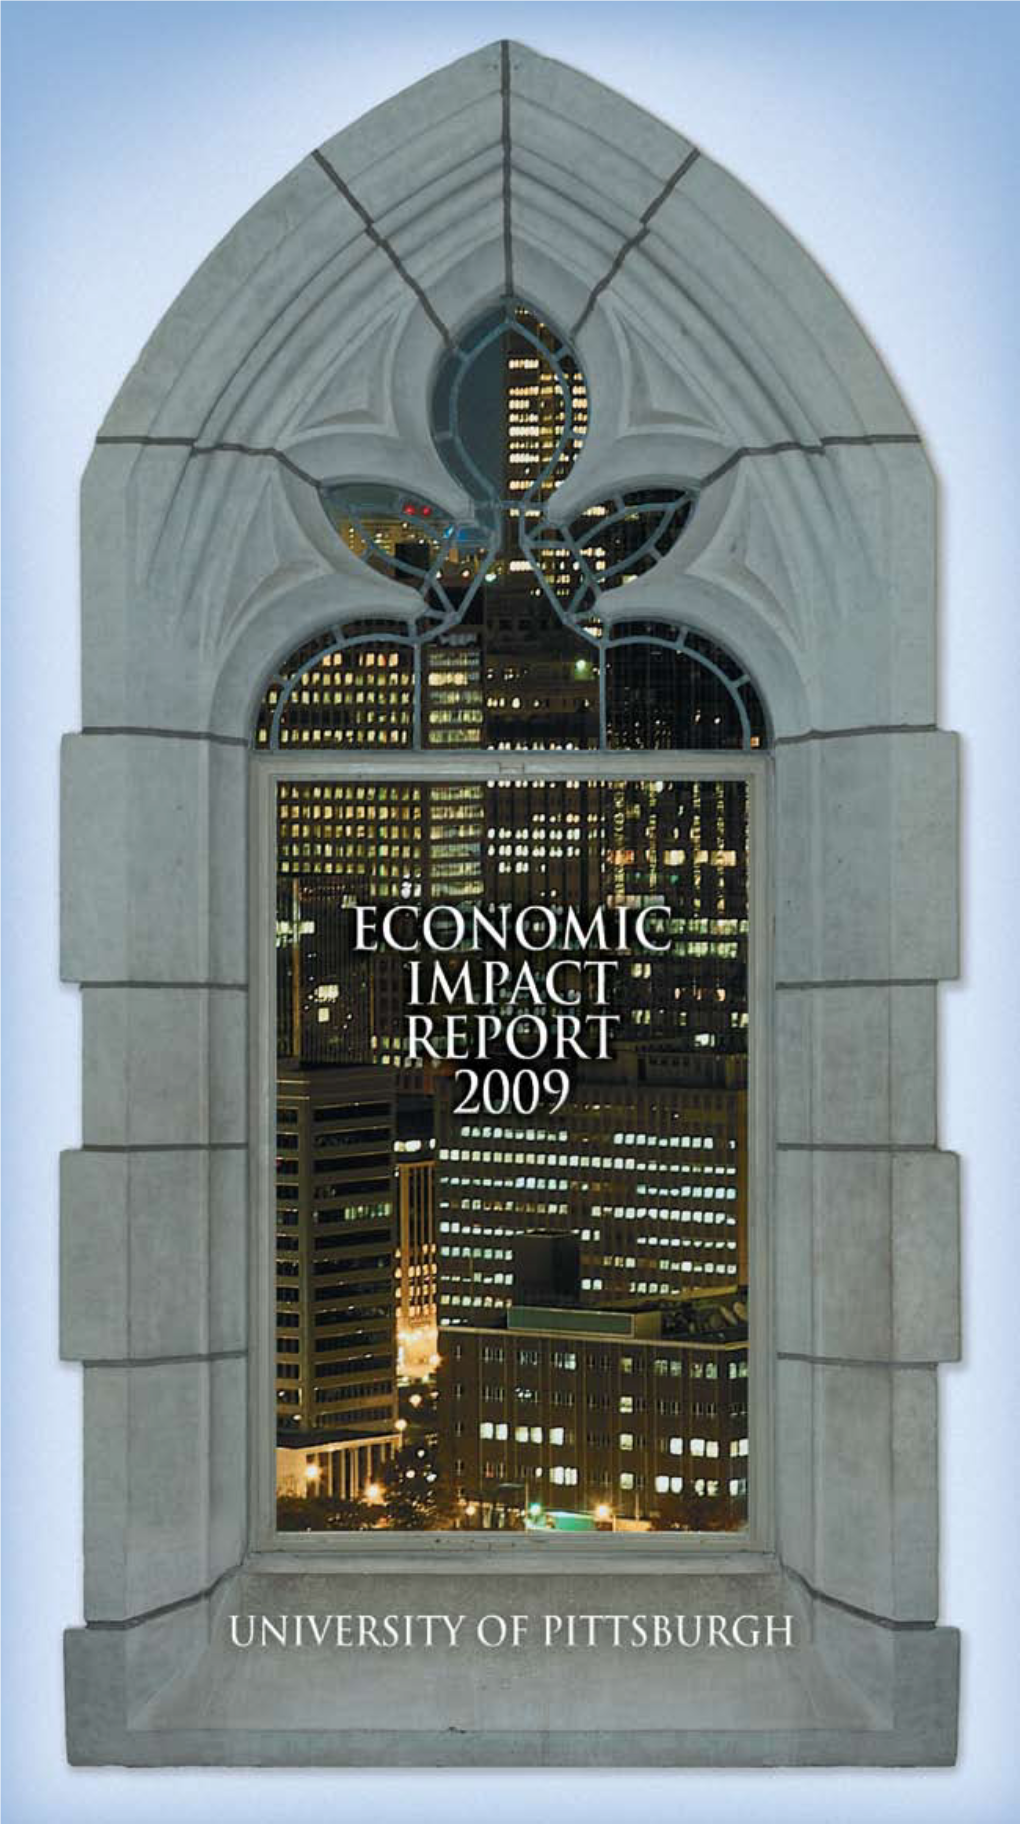 UNIVERSITY of PITTSBURGH Economic IMPACT REPORT 2009 SERVING AS a VITAL ECONOMIC ENGINE for the REGION